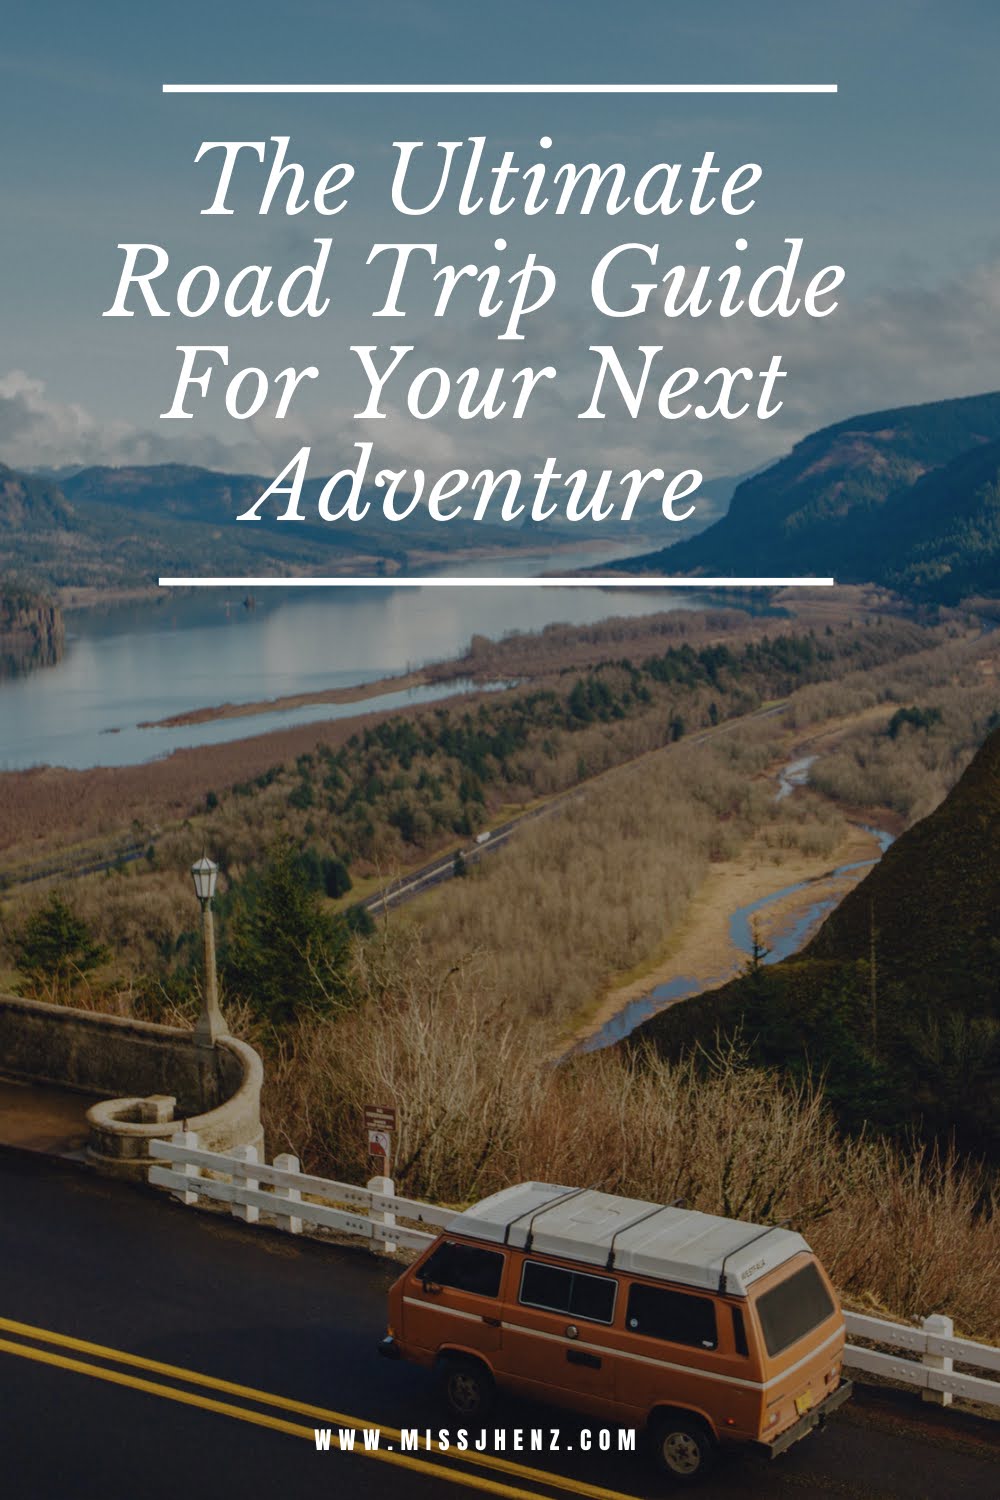 The Ultimate Road Trip Guide For Your Next Adventure